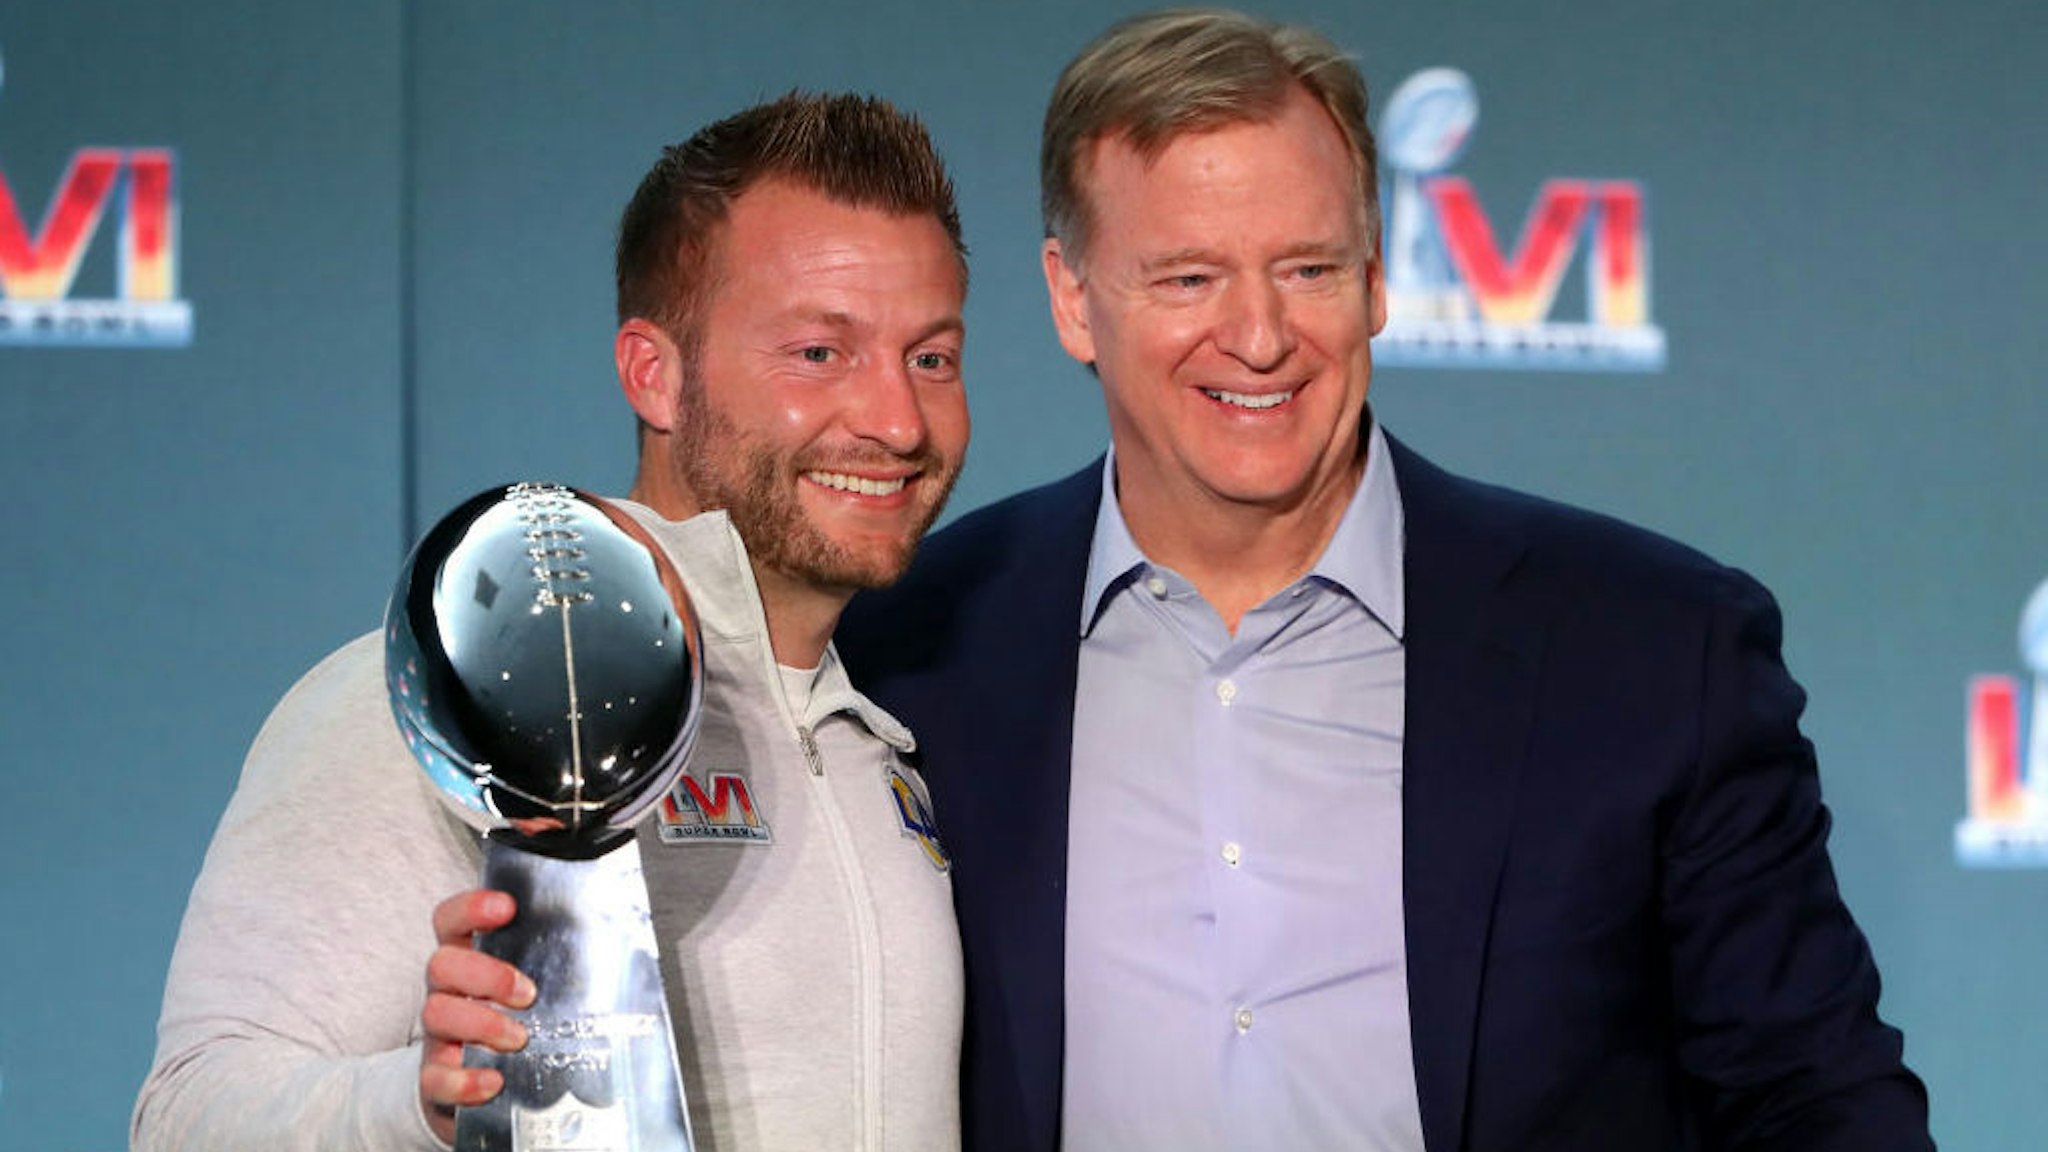 LOS ANGELES, CALIFORNIA - FEBRUARY 14: Head coach Sean McVay of the Los Angeles Rams and NFL Commissioner Roger Goodell pose with the Vince Lombardi Trophy during the Super Bowl LVI head coach and MVP press conference at Los Angeles Convention Center on February 14, 2022 in Los Angeles, California. (Photo by Katelyn Mulcahy/Getty Images)